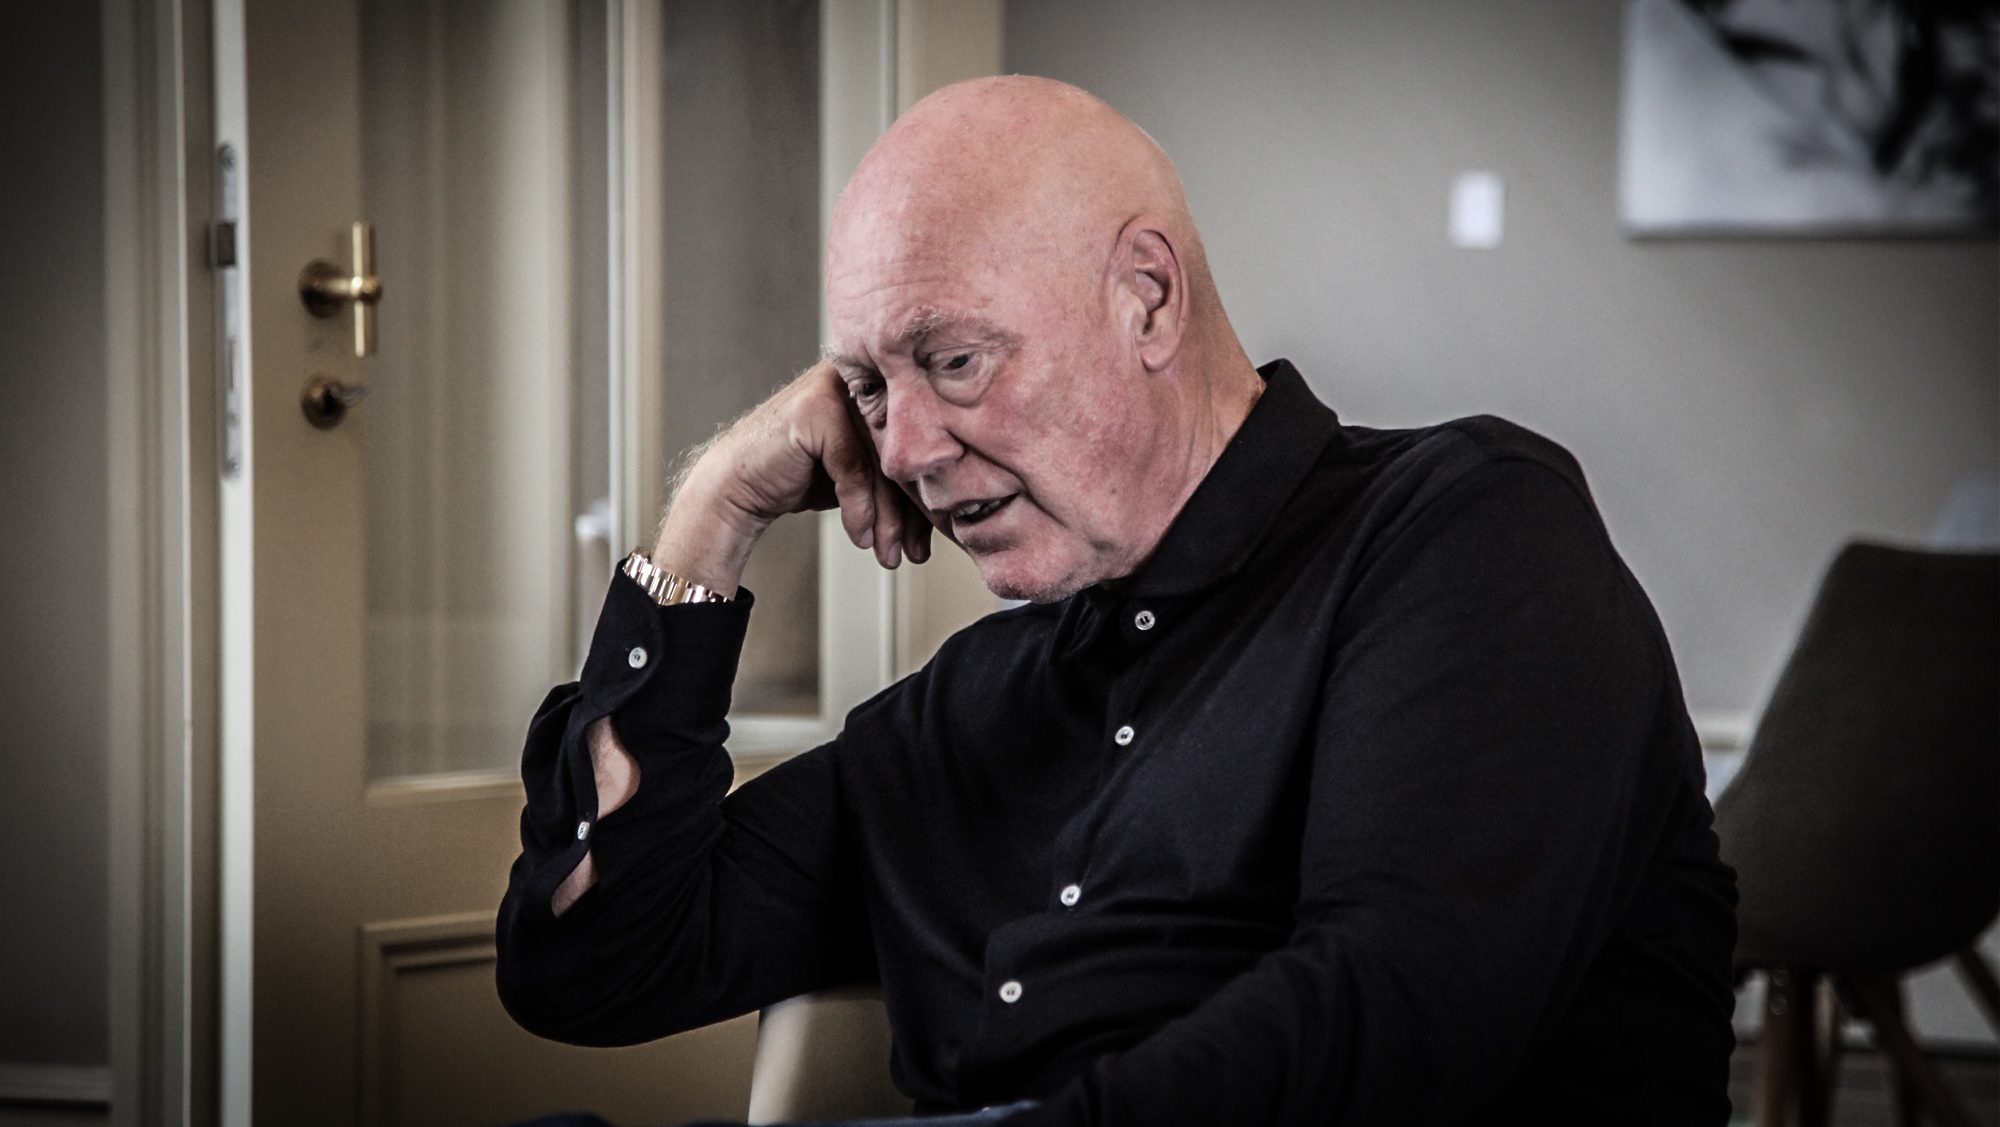 Watch industry legend Jean-Claude Biver teams up with son to